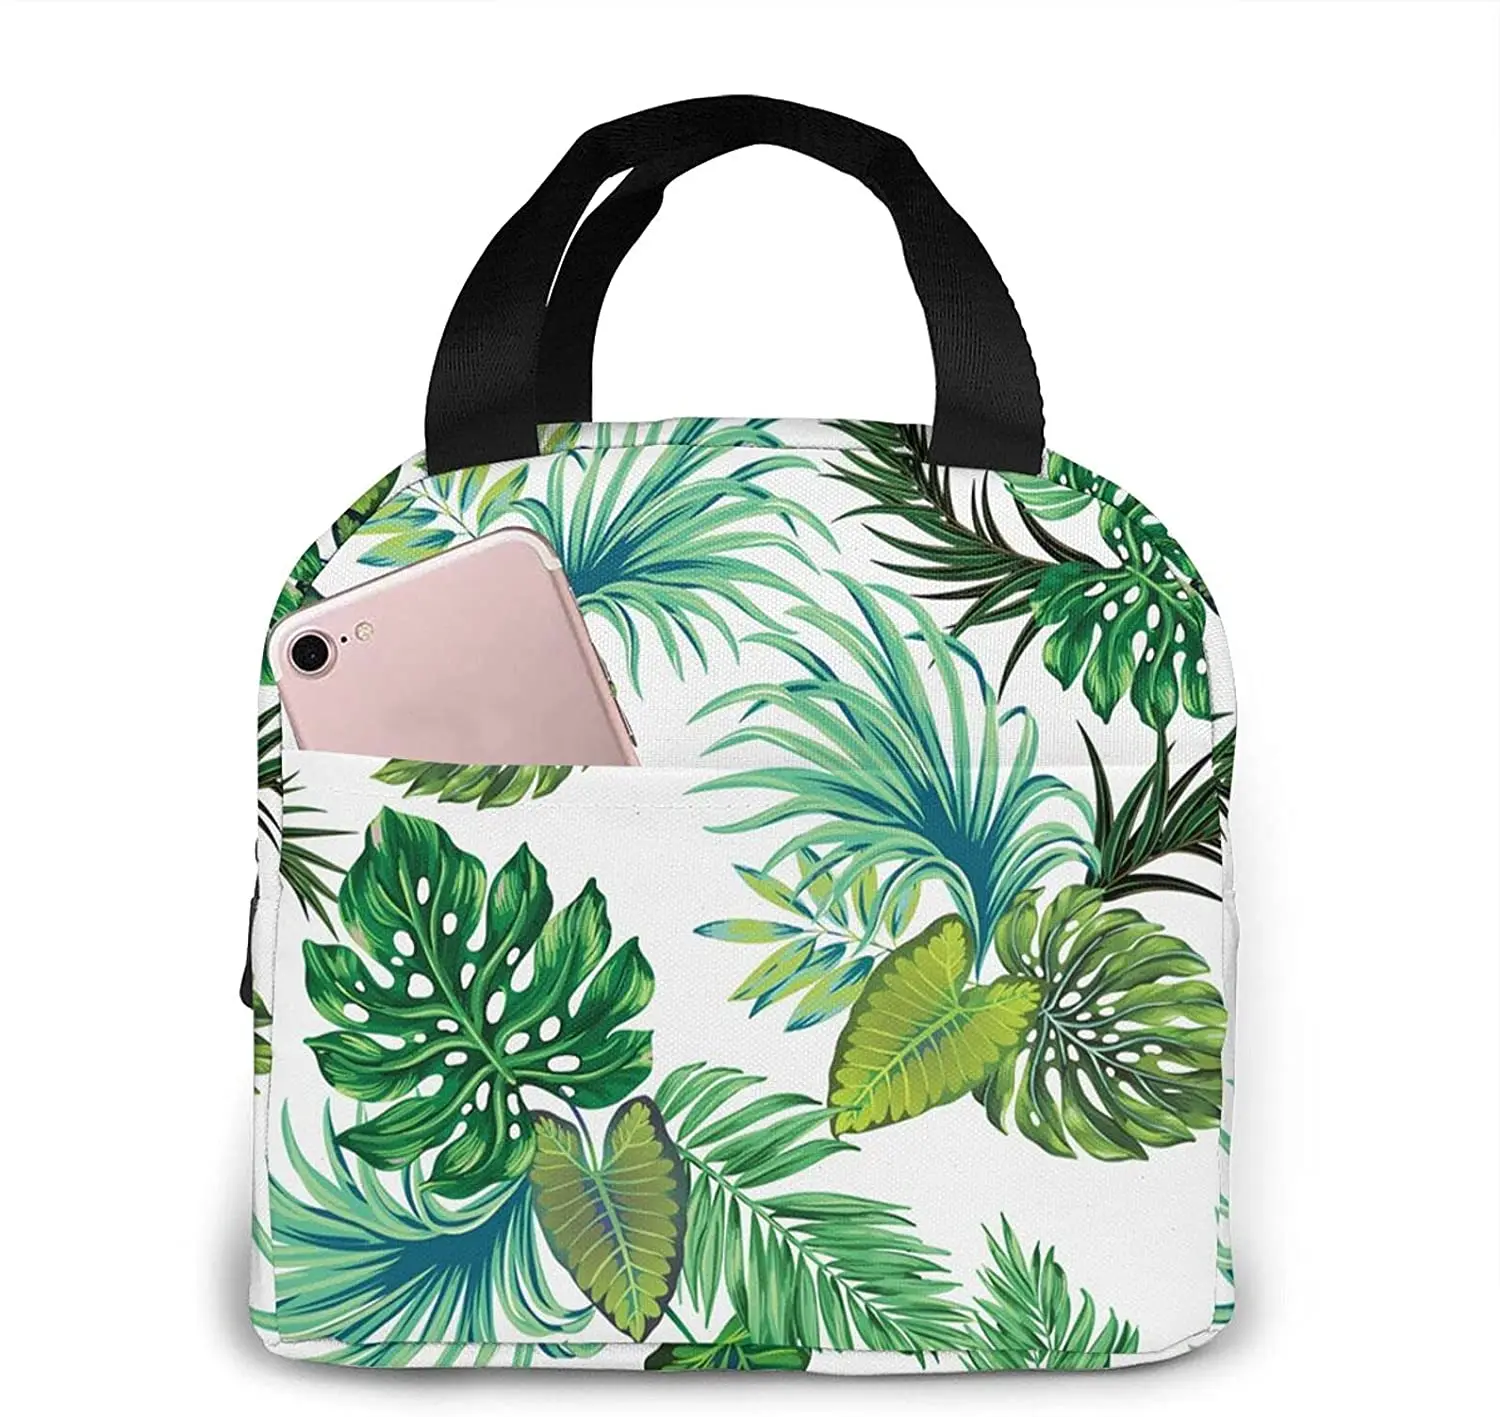 

Palm Leaf Lunch Bag for Men Women Insulated Cooler Tote Reusable Lunchbox with Front Pocket Large Containers Work Picnic